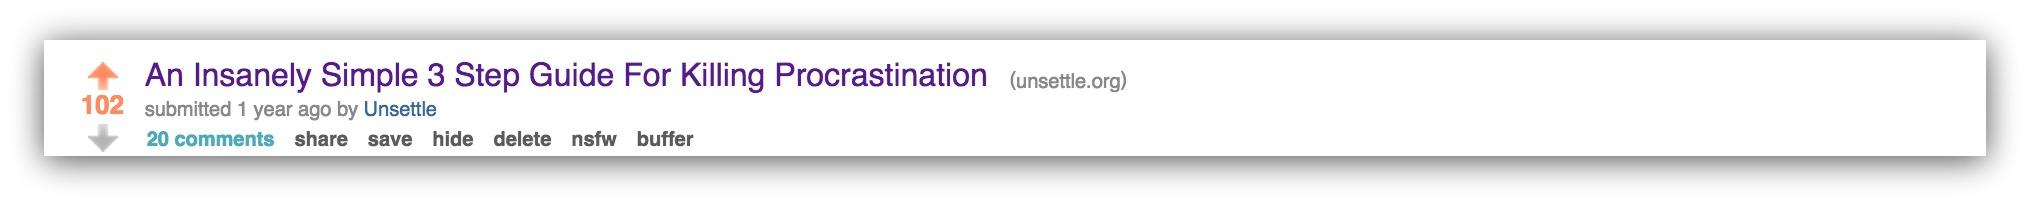 Screenshot of a reddit link to unsettle.org